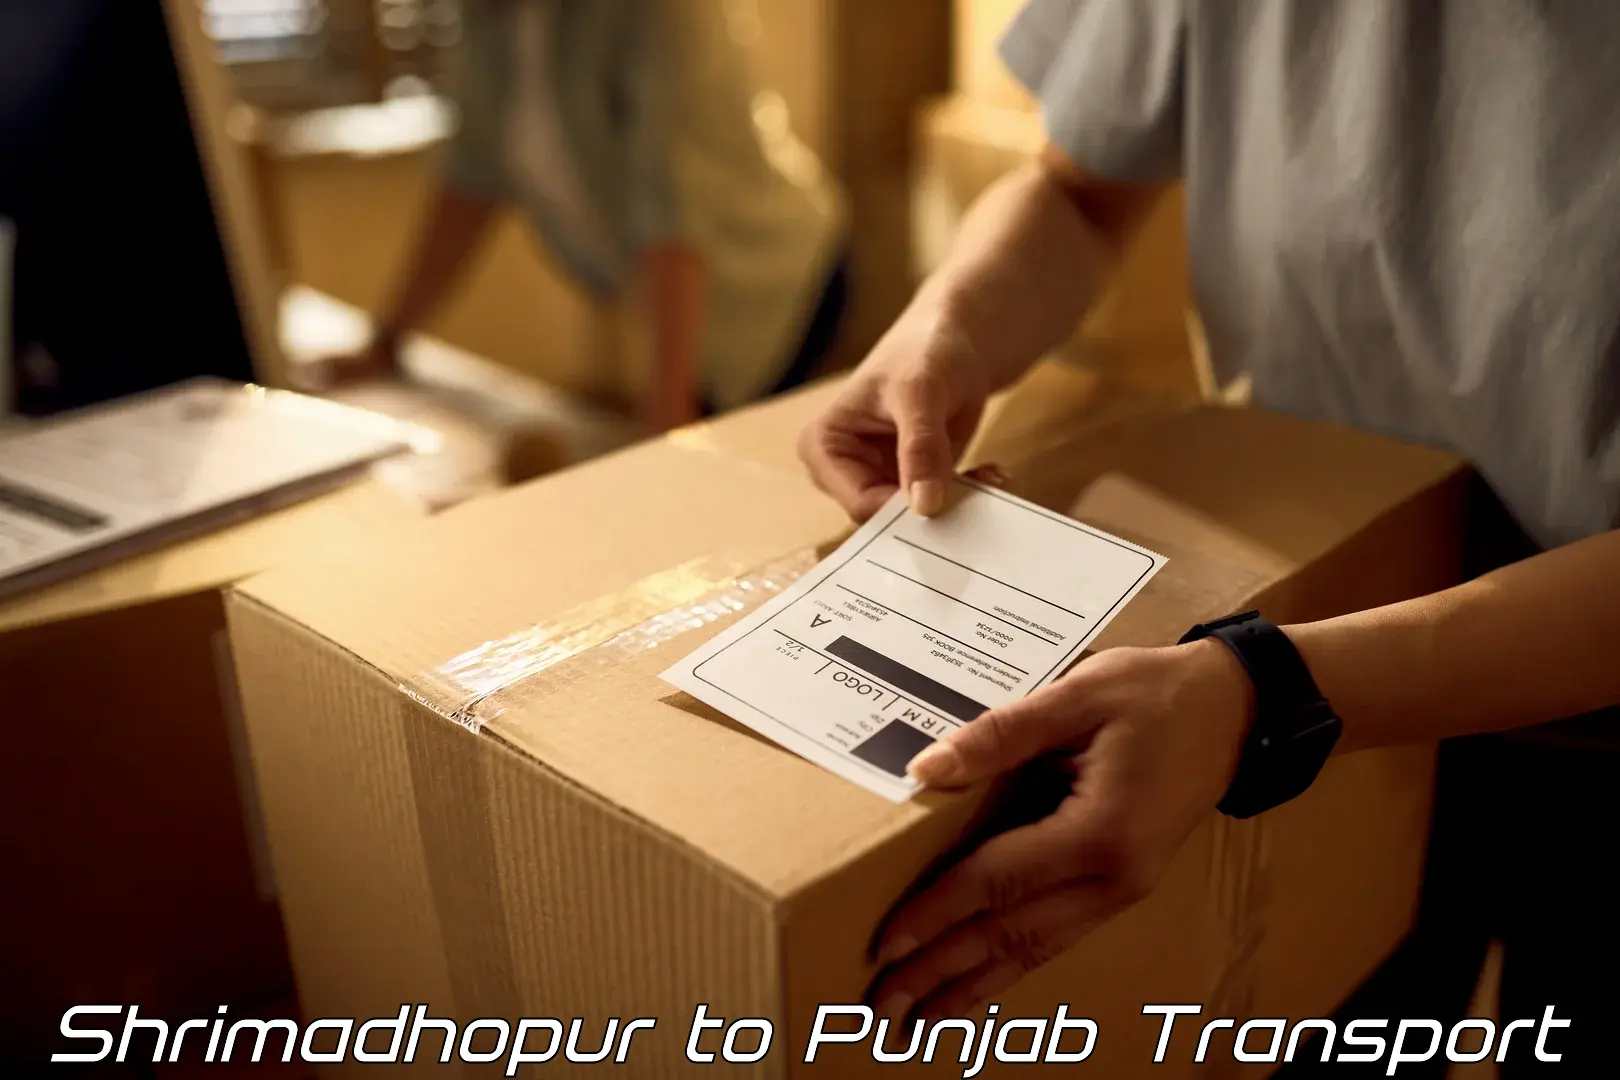 Pick up transport service in Shrimadhopur to Mehta Chowk